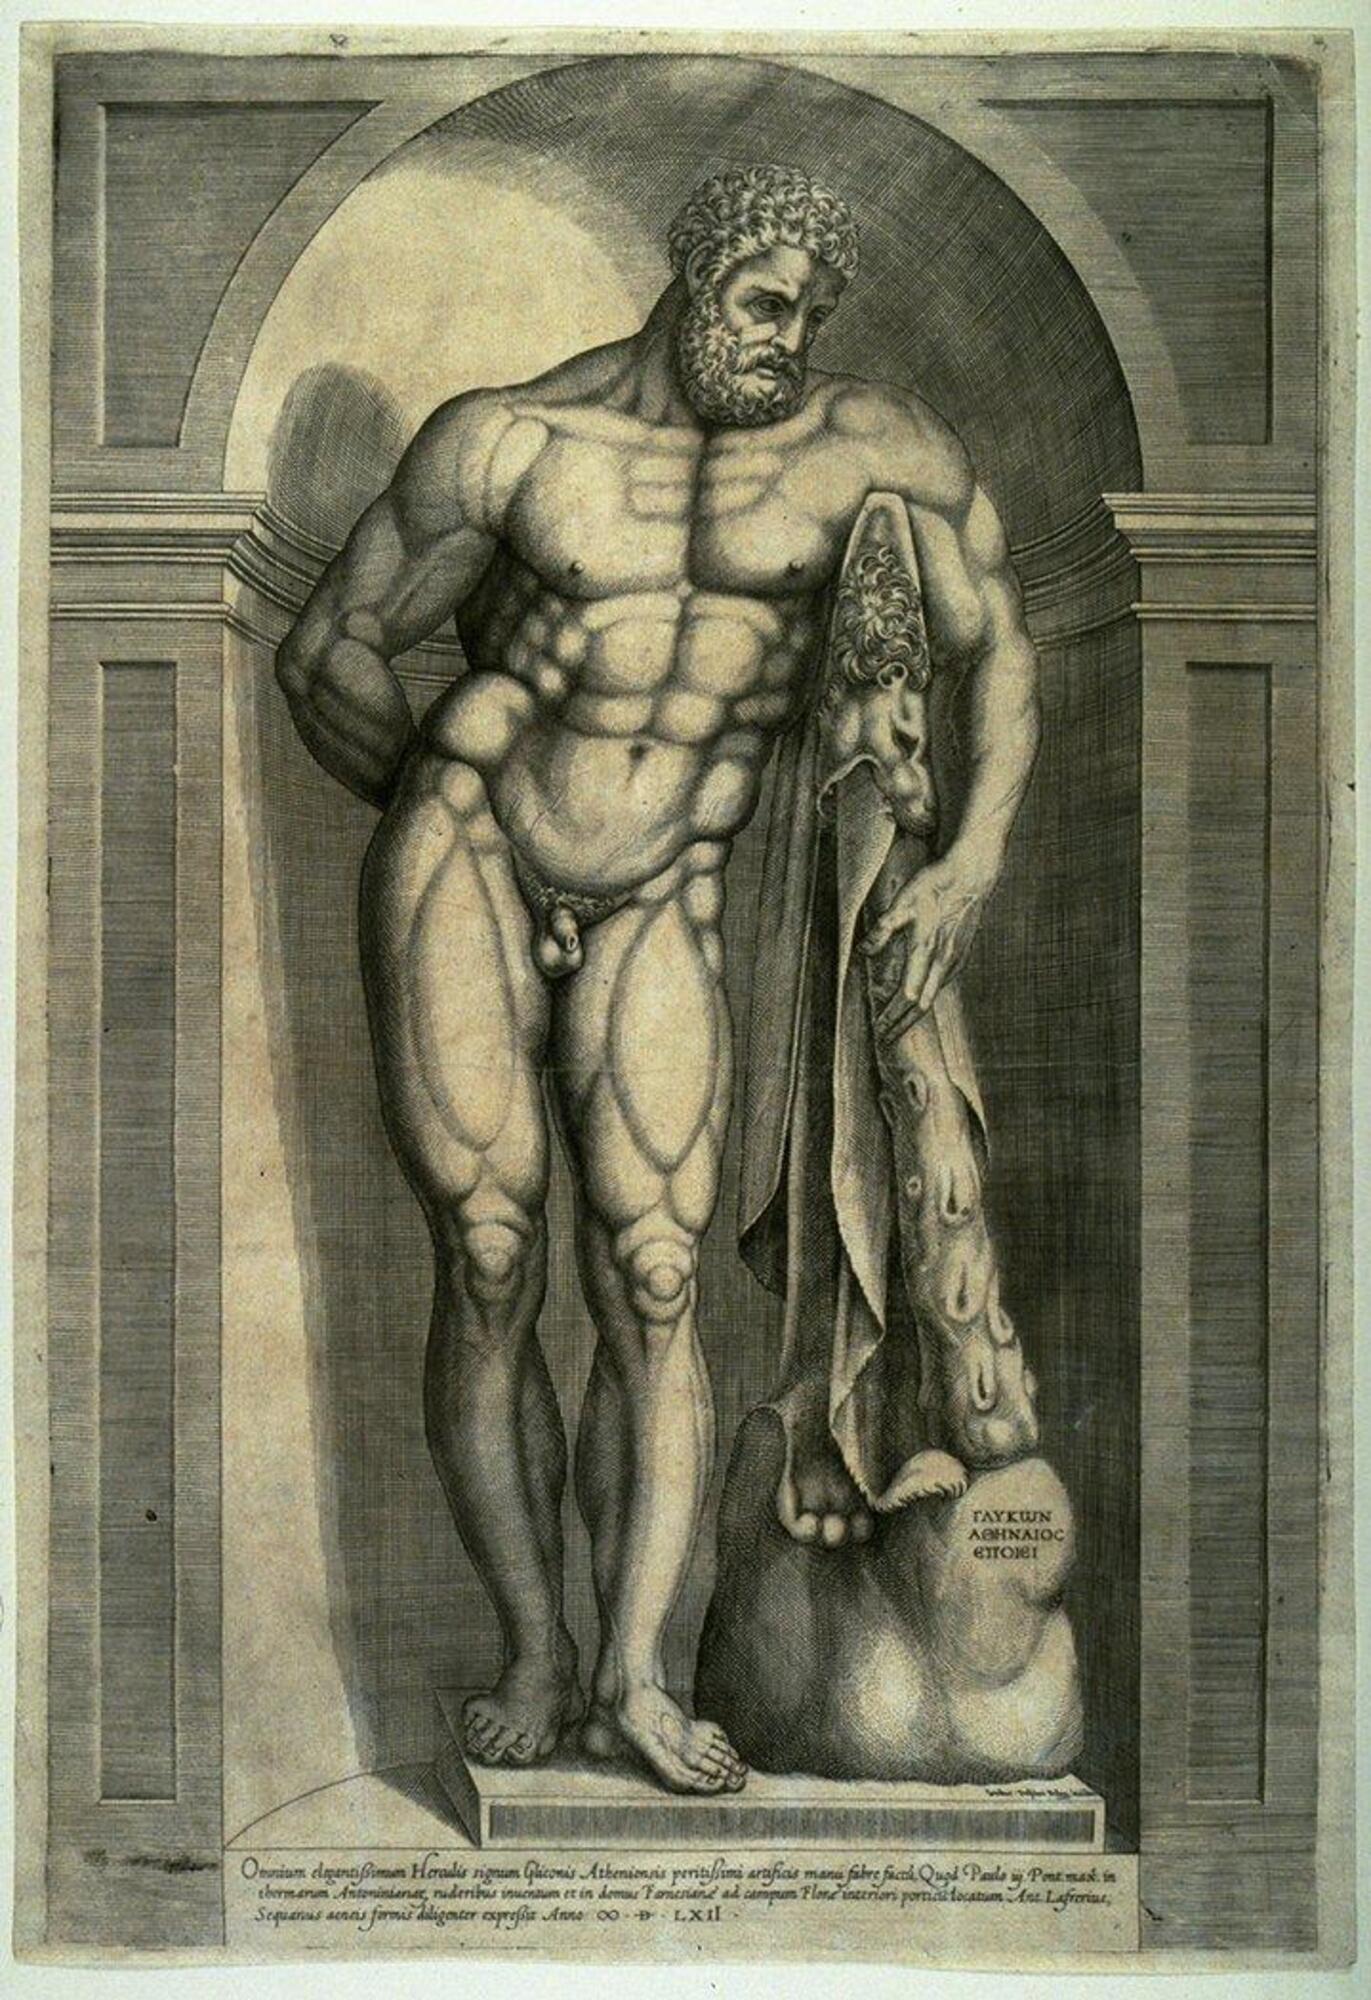 This engraving reproduces a colossal marble sculpture of Hercules leaning upon his club, which is draped with a lion skin. Bos carefully records the powerful musculature of the figure and sets the statue within a niche.